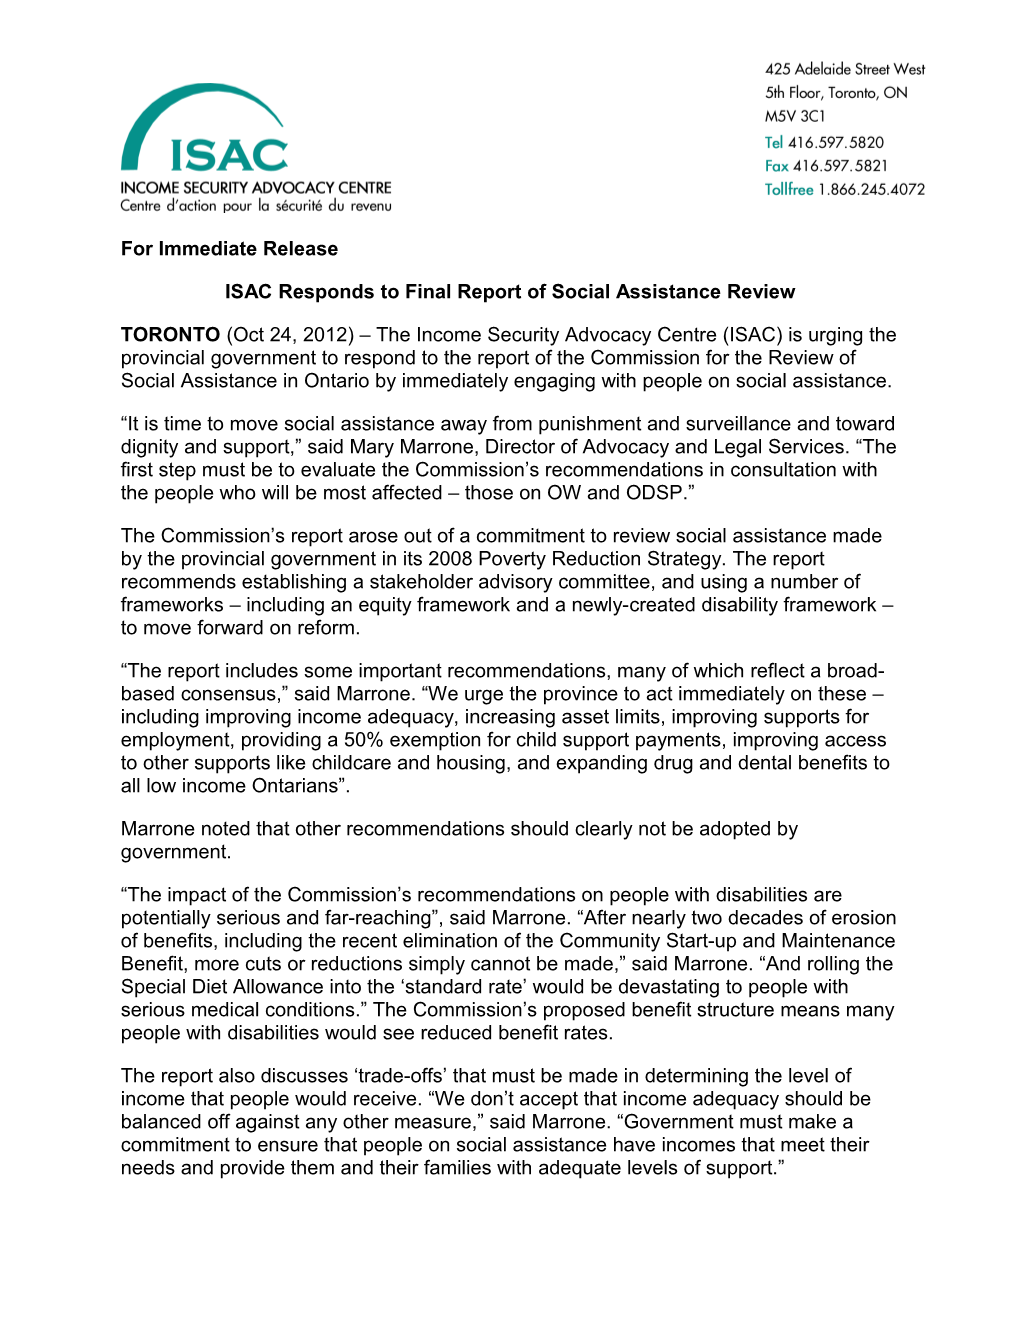 ISAC Response to the SAR Report